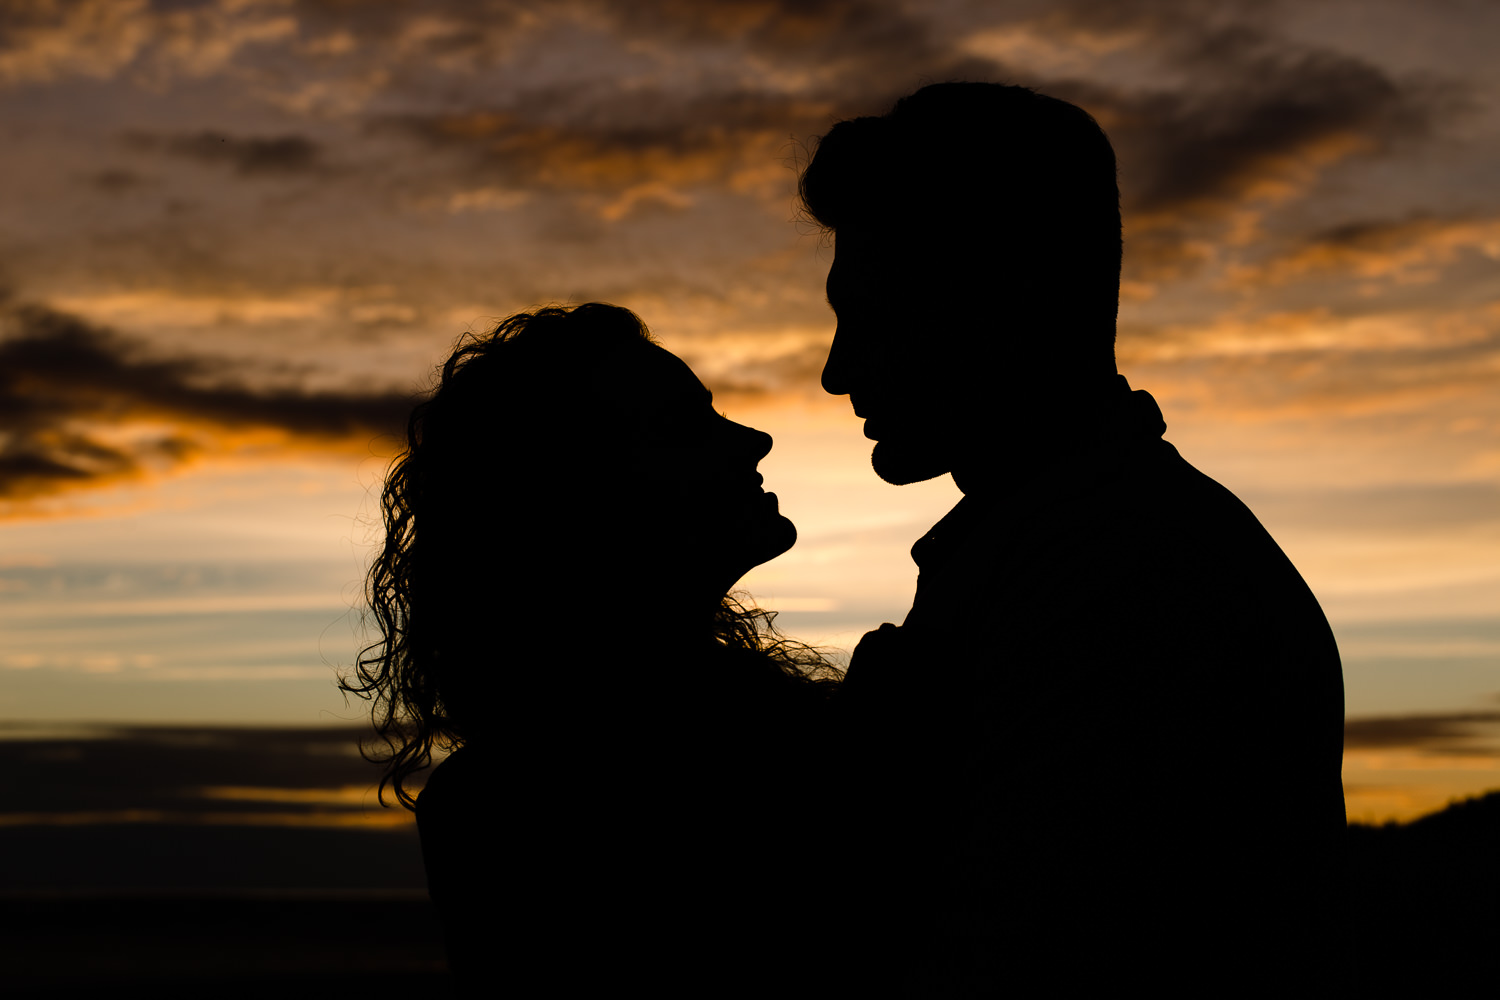 Couples silhouette against the colourful sunset sky - Wirral Country Park 